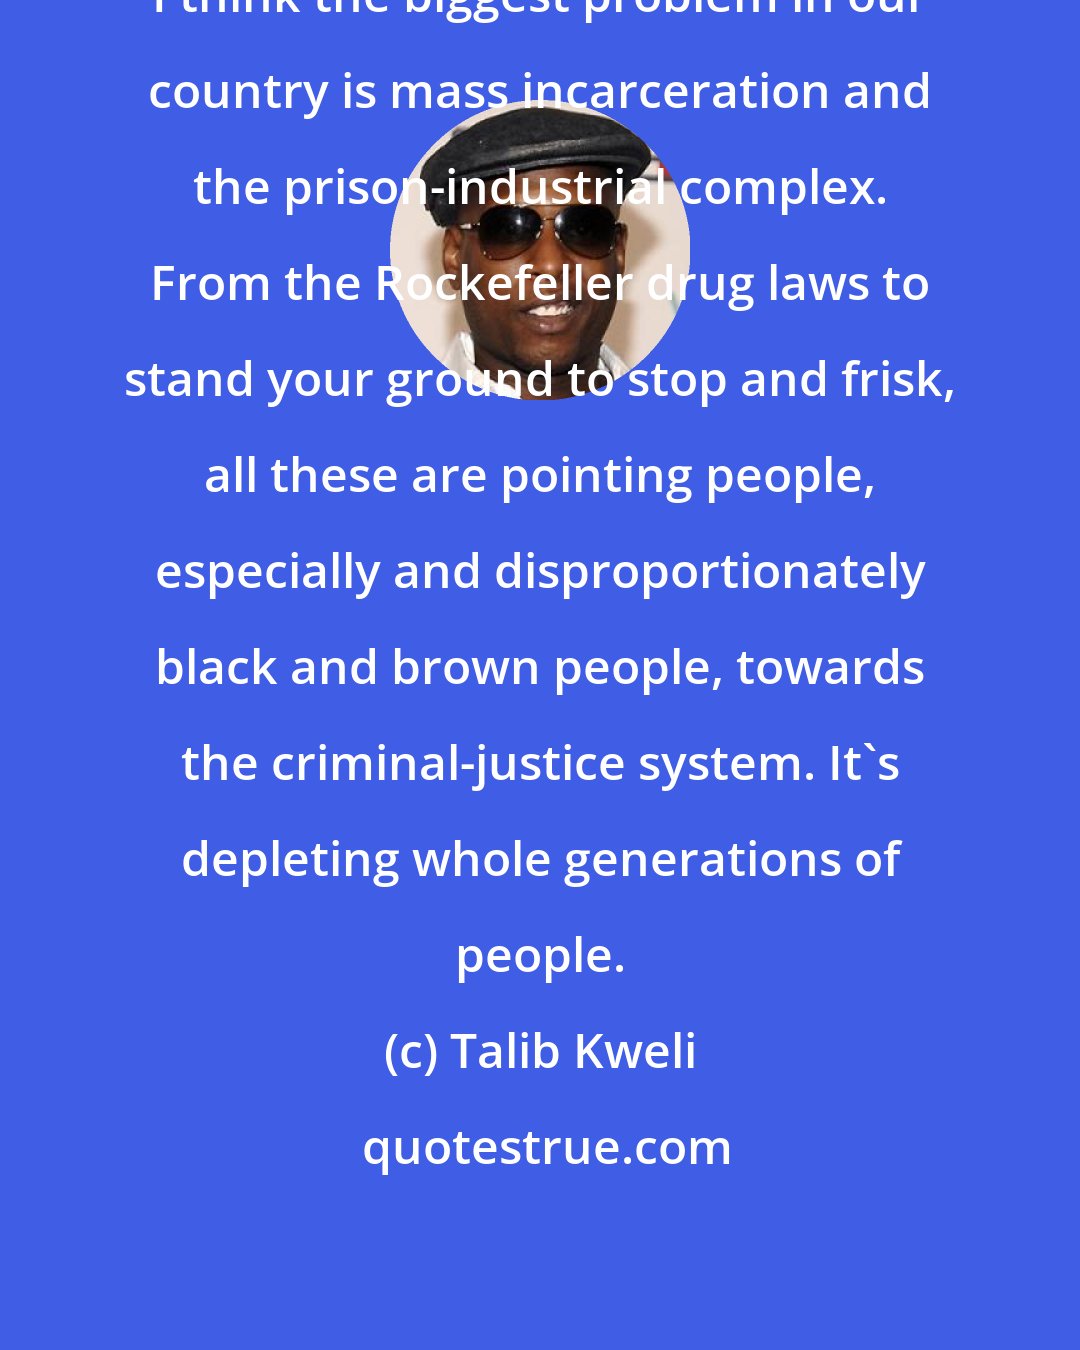 Talib Kweli: I think the biggest problem in our country is mass incarceration and the prison-industrial complex. From the Rockefeller drug laws to stand your ground to stop and frisk, all these are pointing people, especially and disproportionately black and brown people, towards the criminal-justice system. It's depleting whole generations of people.